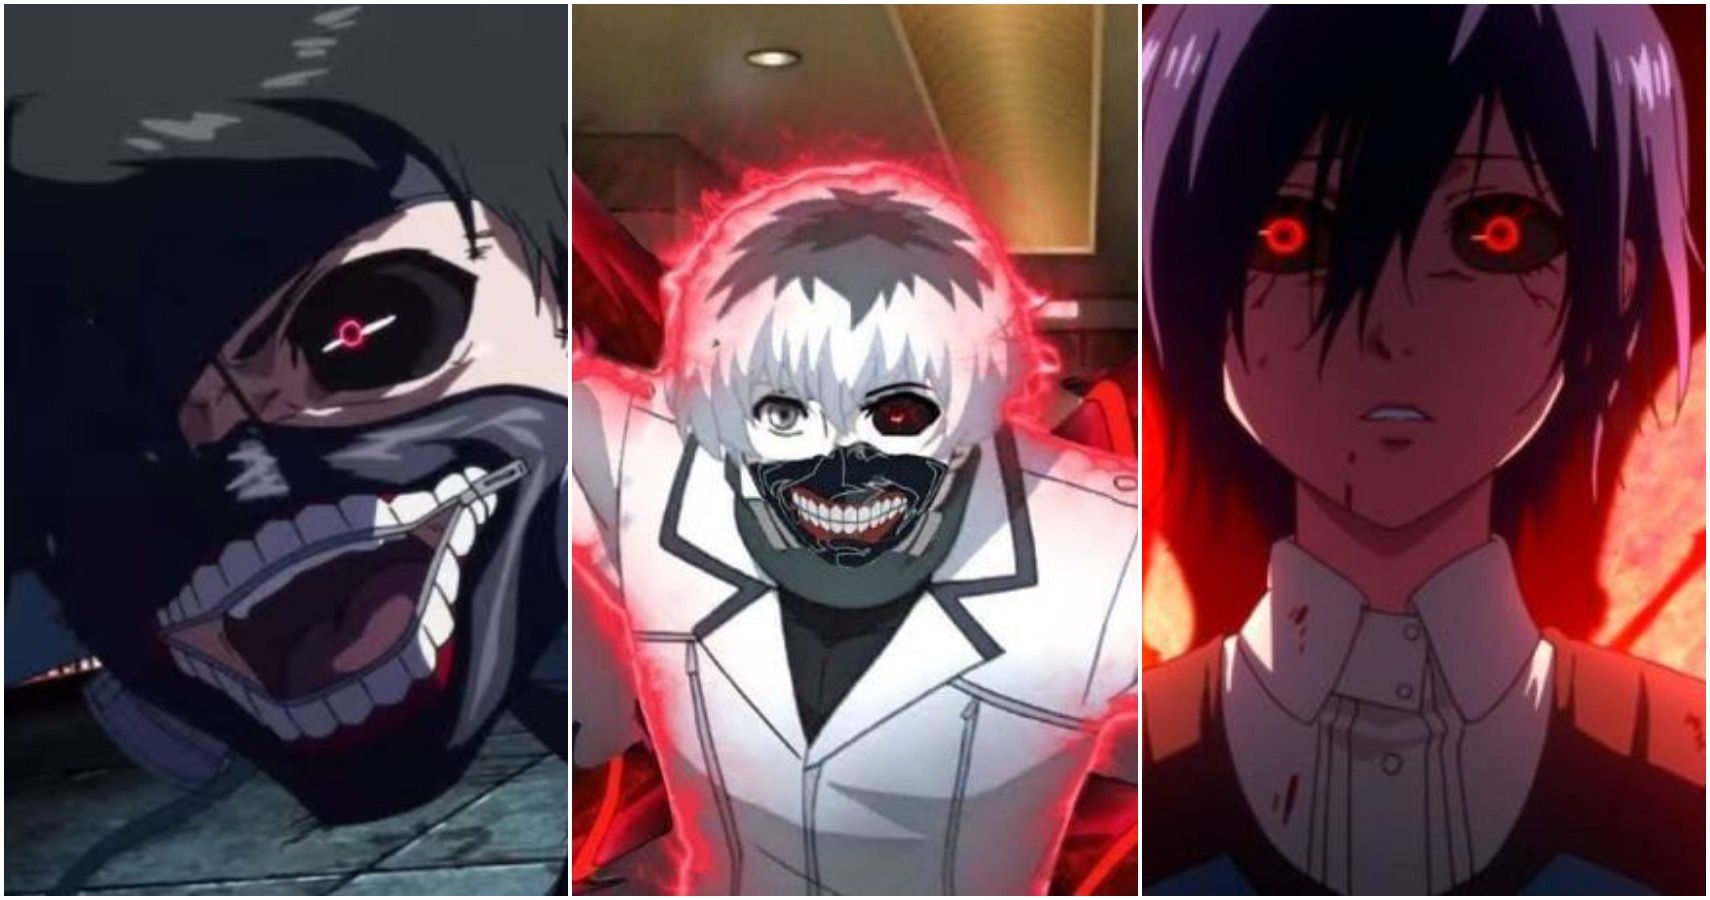 Tokyo Ghoul Vs Tokyo Ghoul:Re: Which One Is Better?